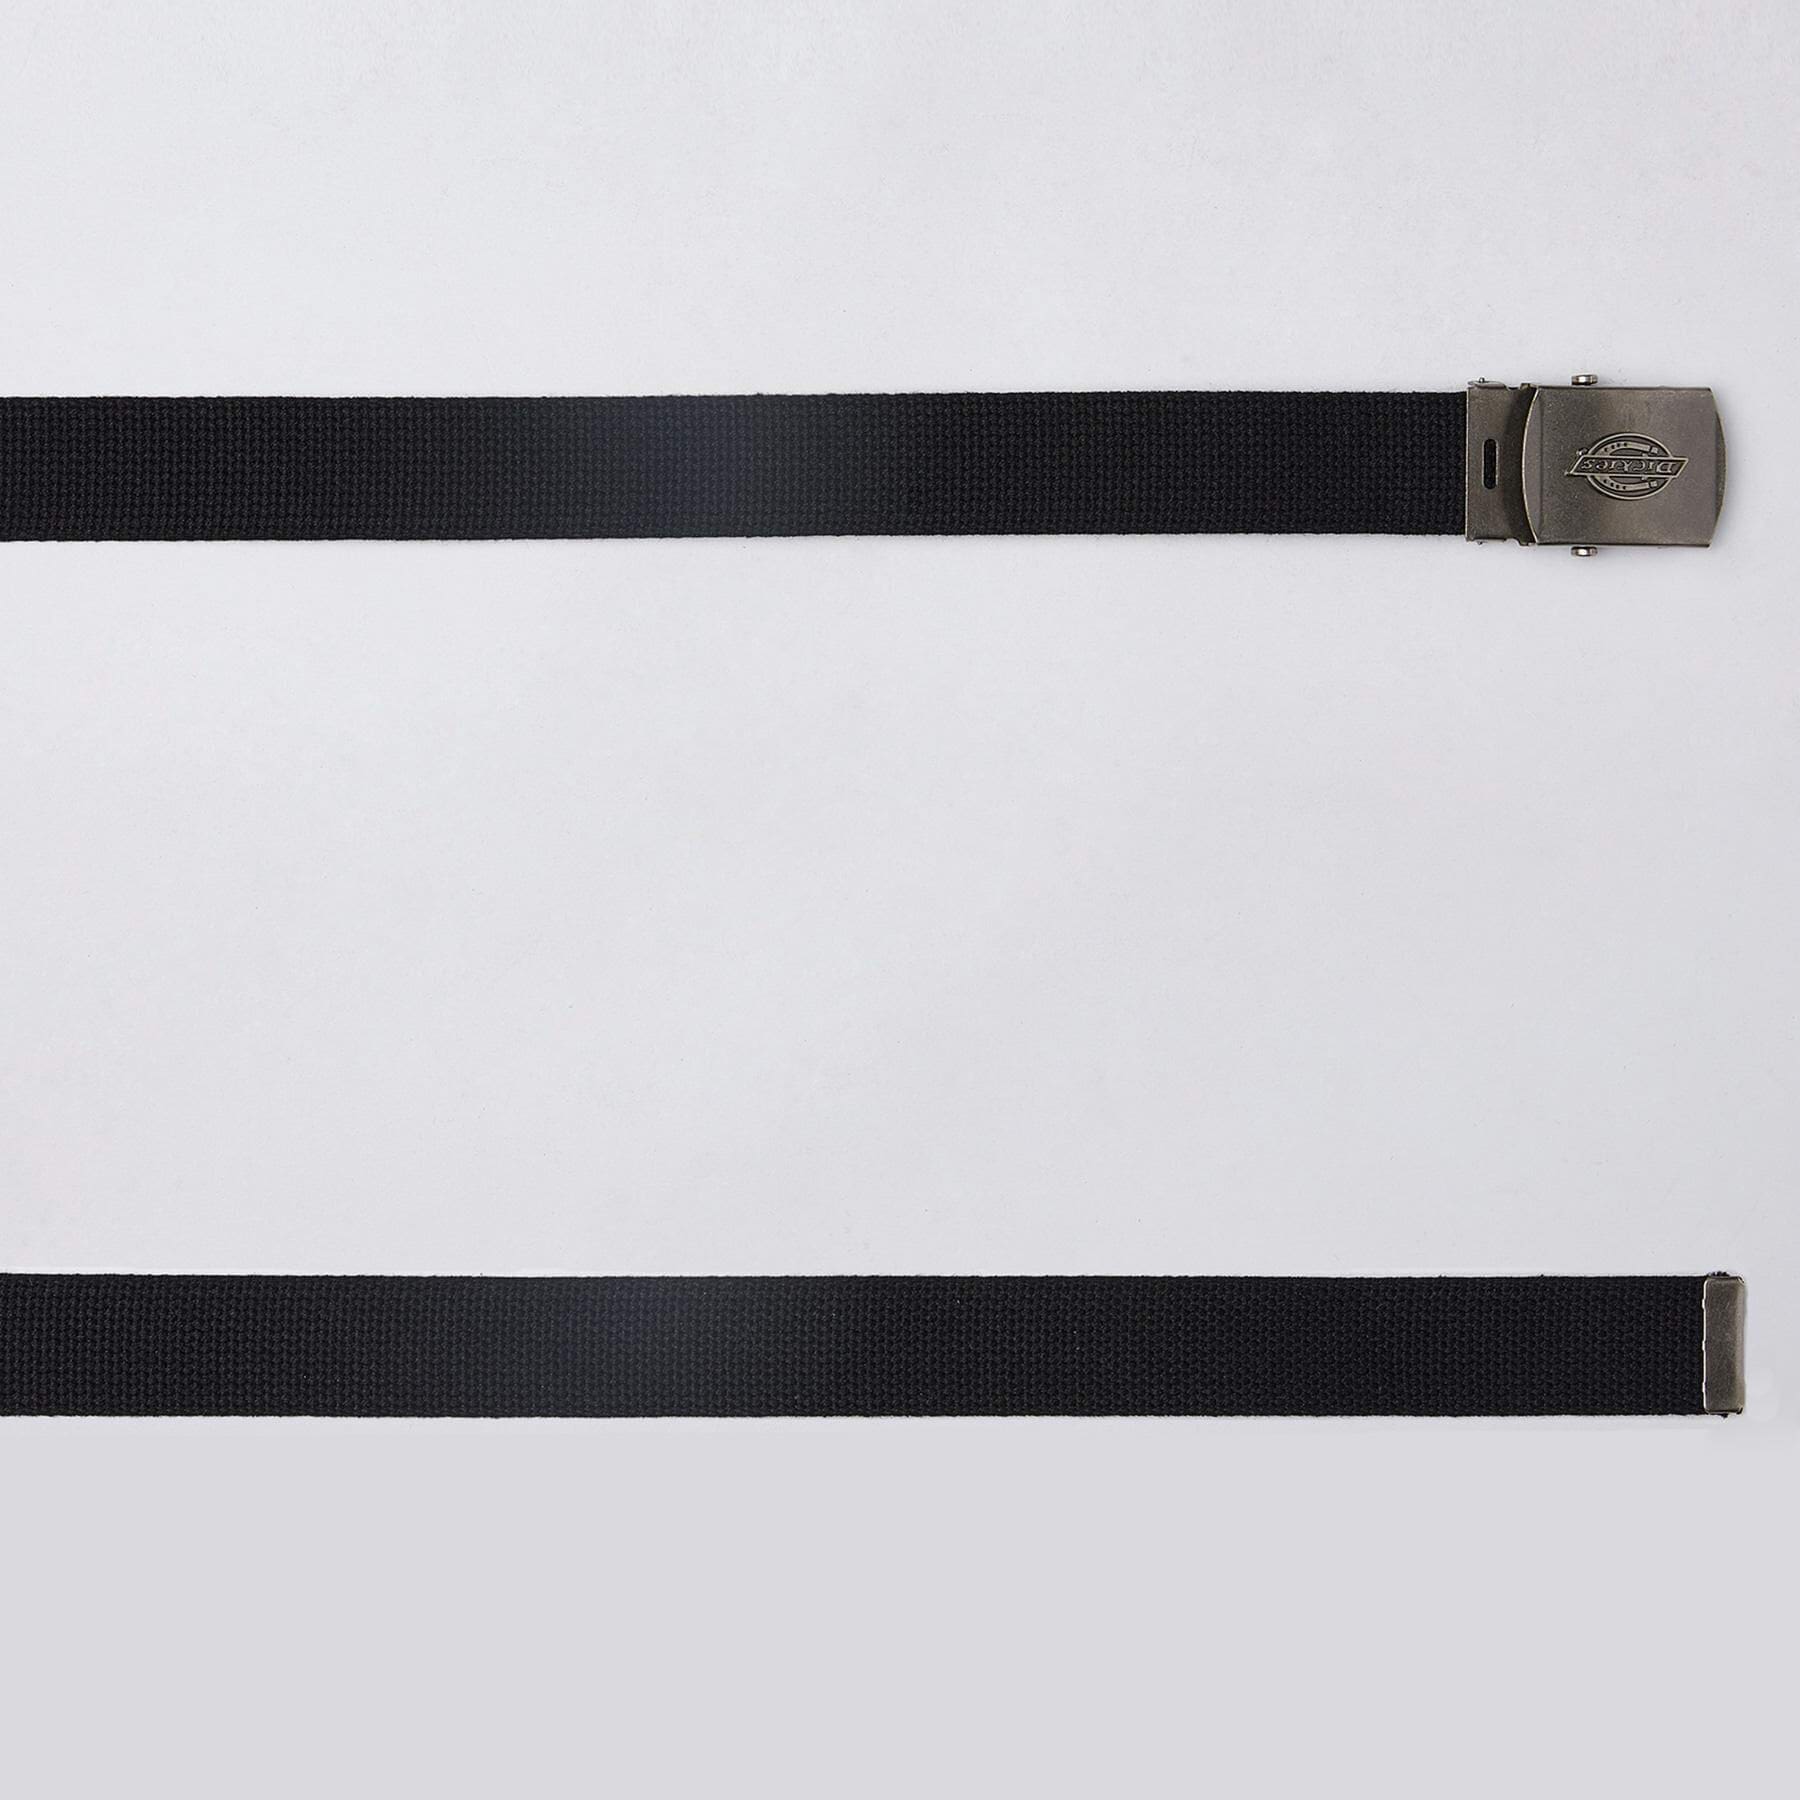 Dickies Cotton Web Belt In Black - FREE* Shipping & Easy